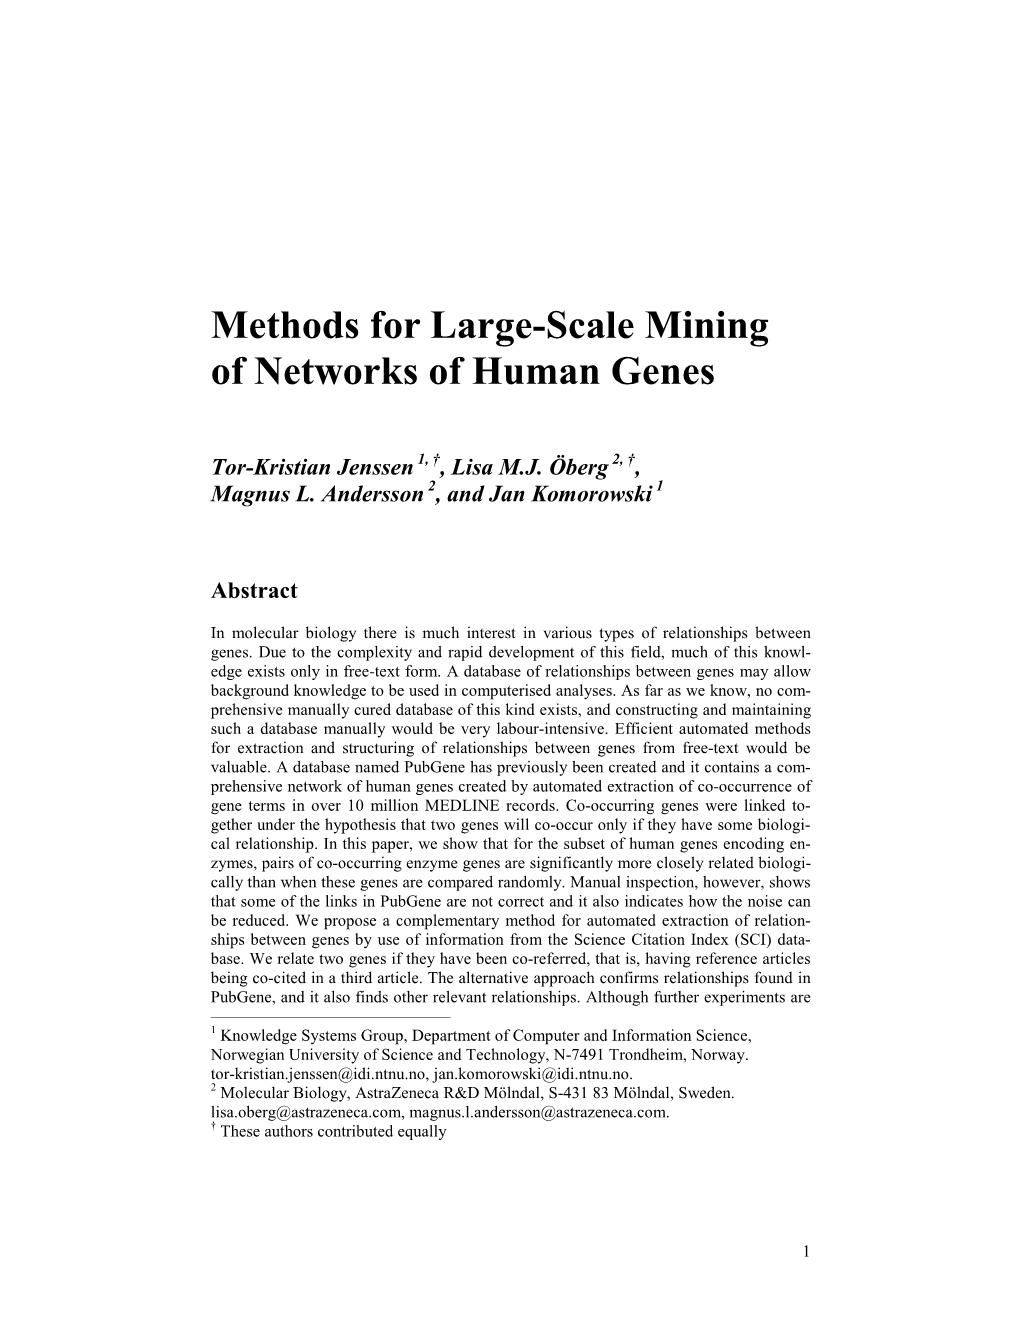 Methods for Large-Scale Mining of Networks of Human Genes